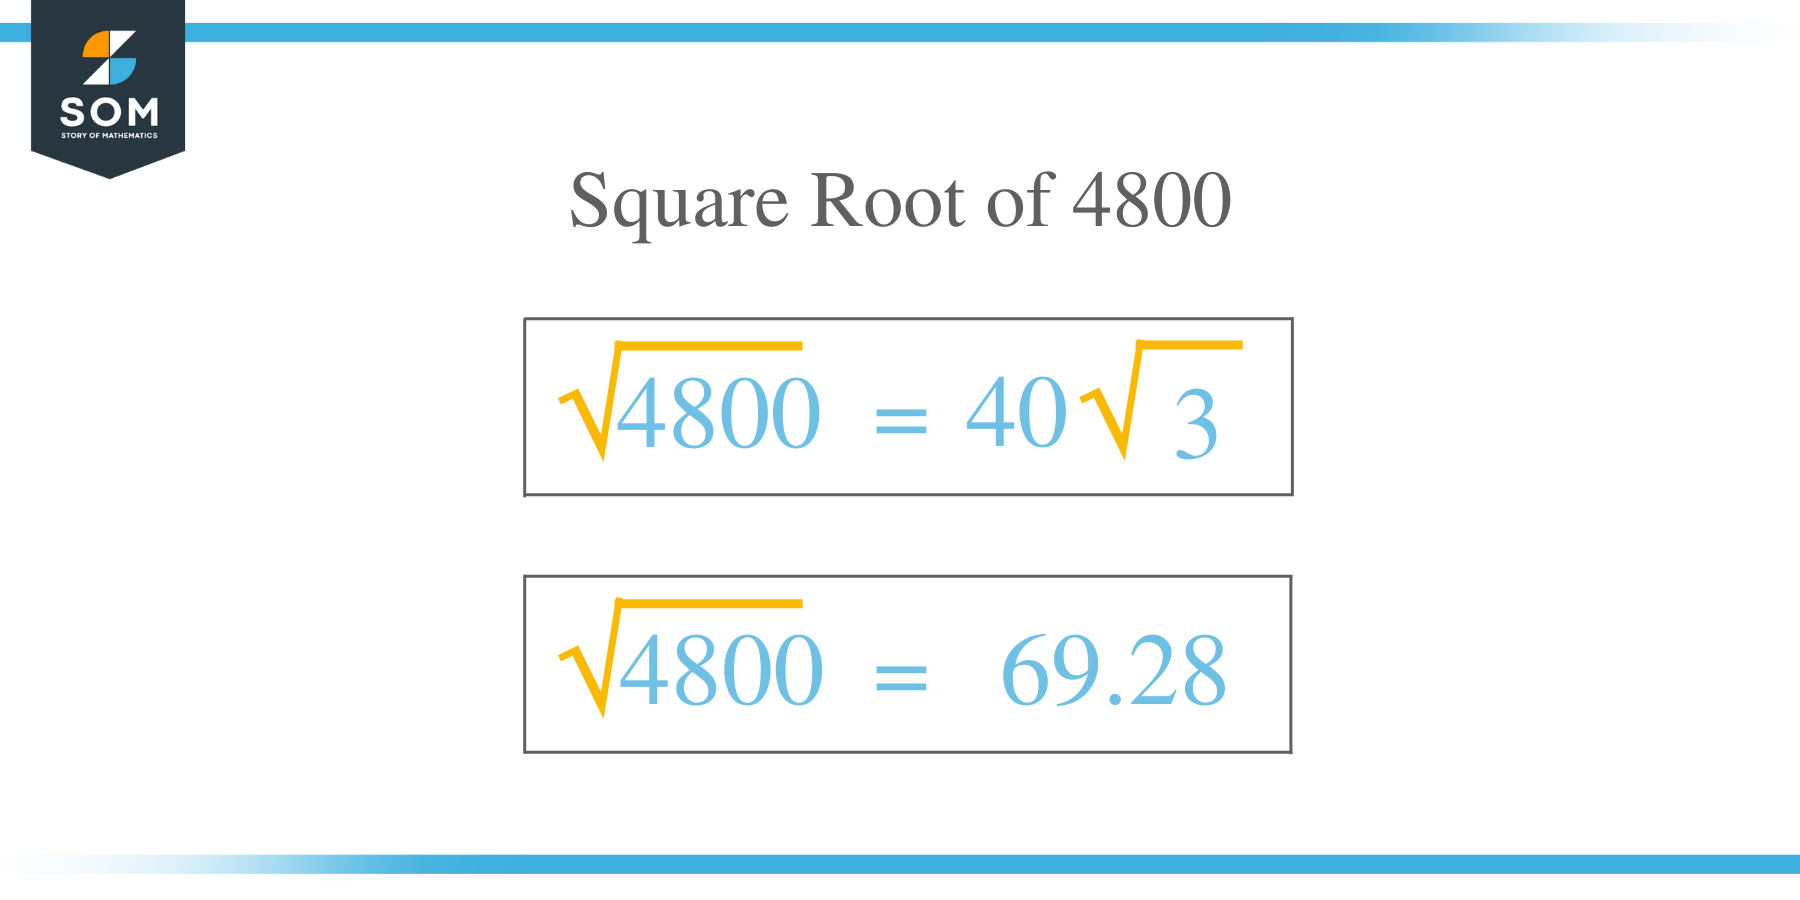 Square Root of 4800